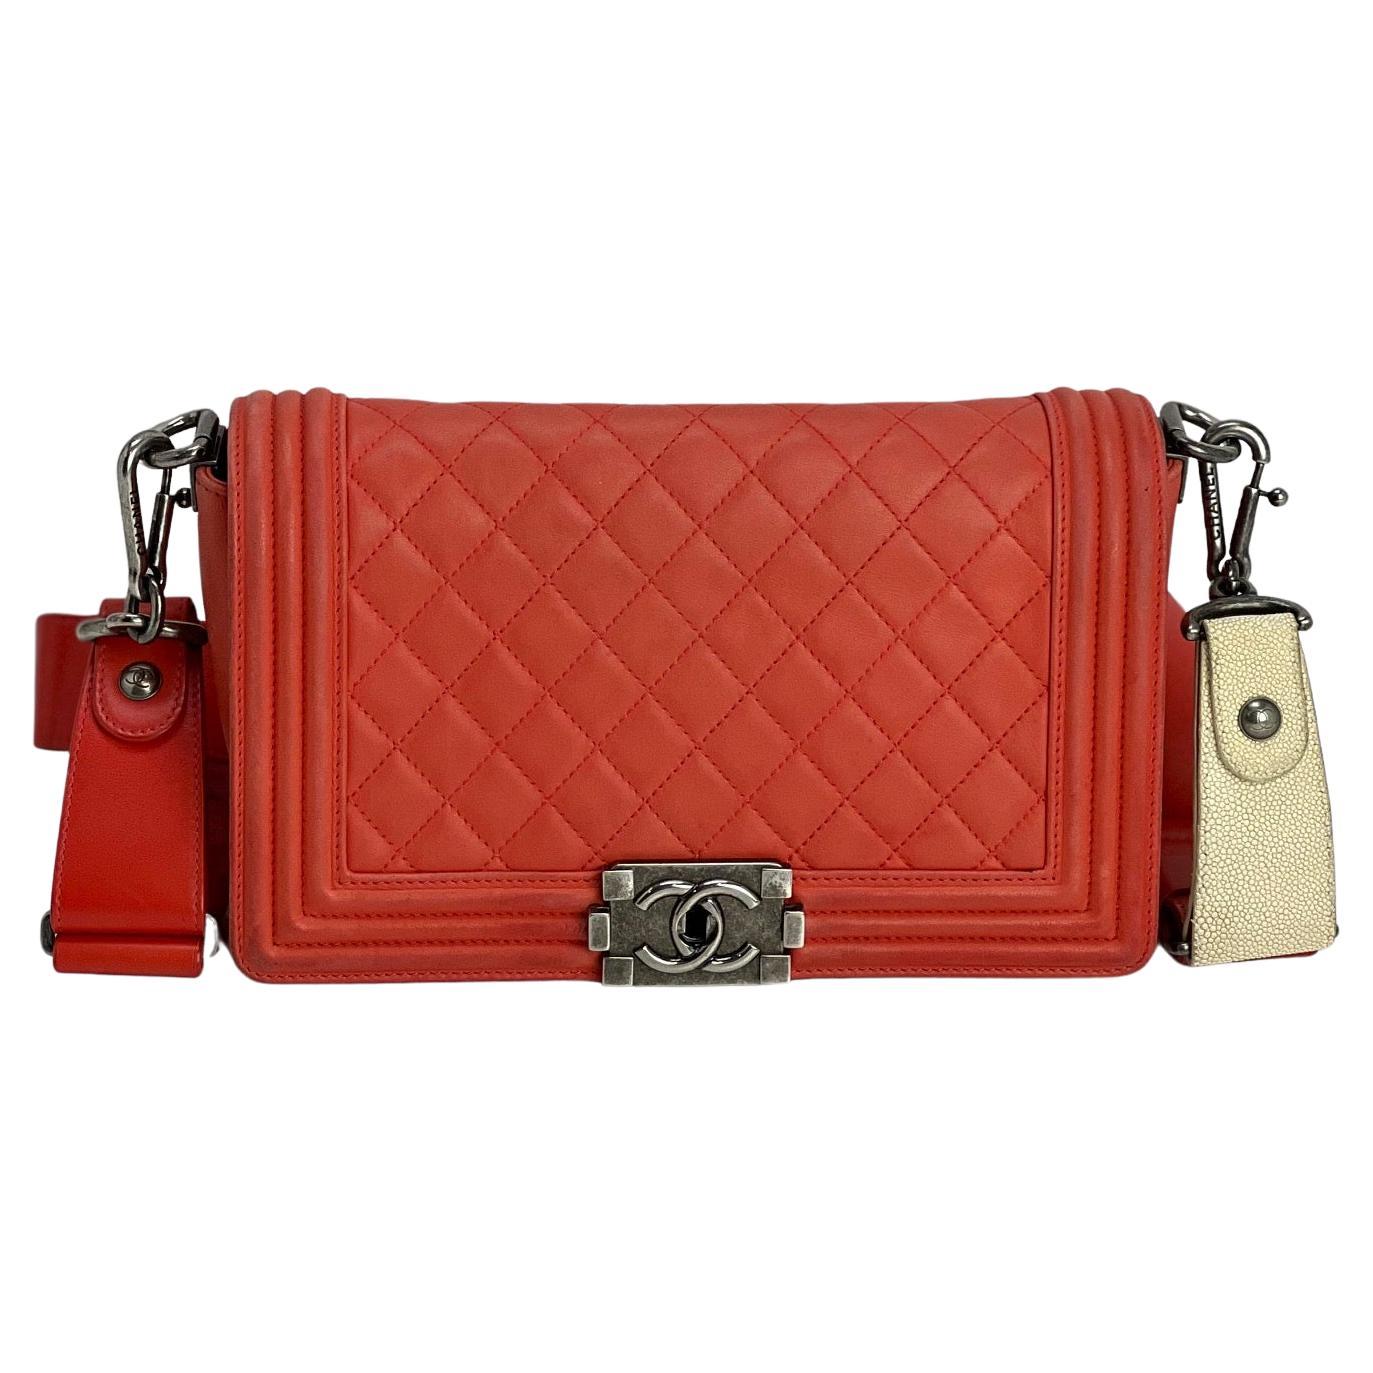 CHANEL Lambskin Quilted Medium Boy Red Flap Bag For Sale